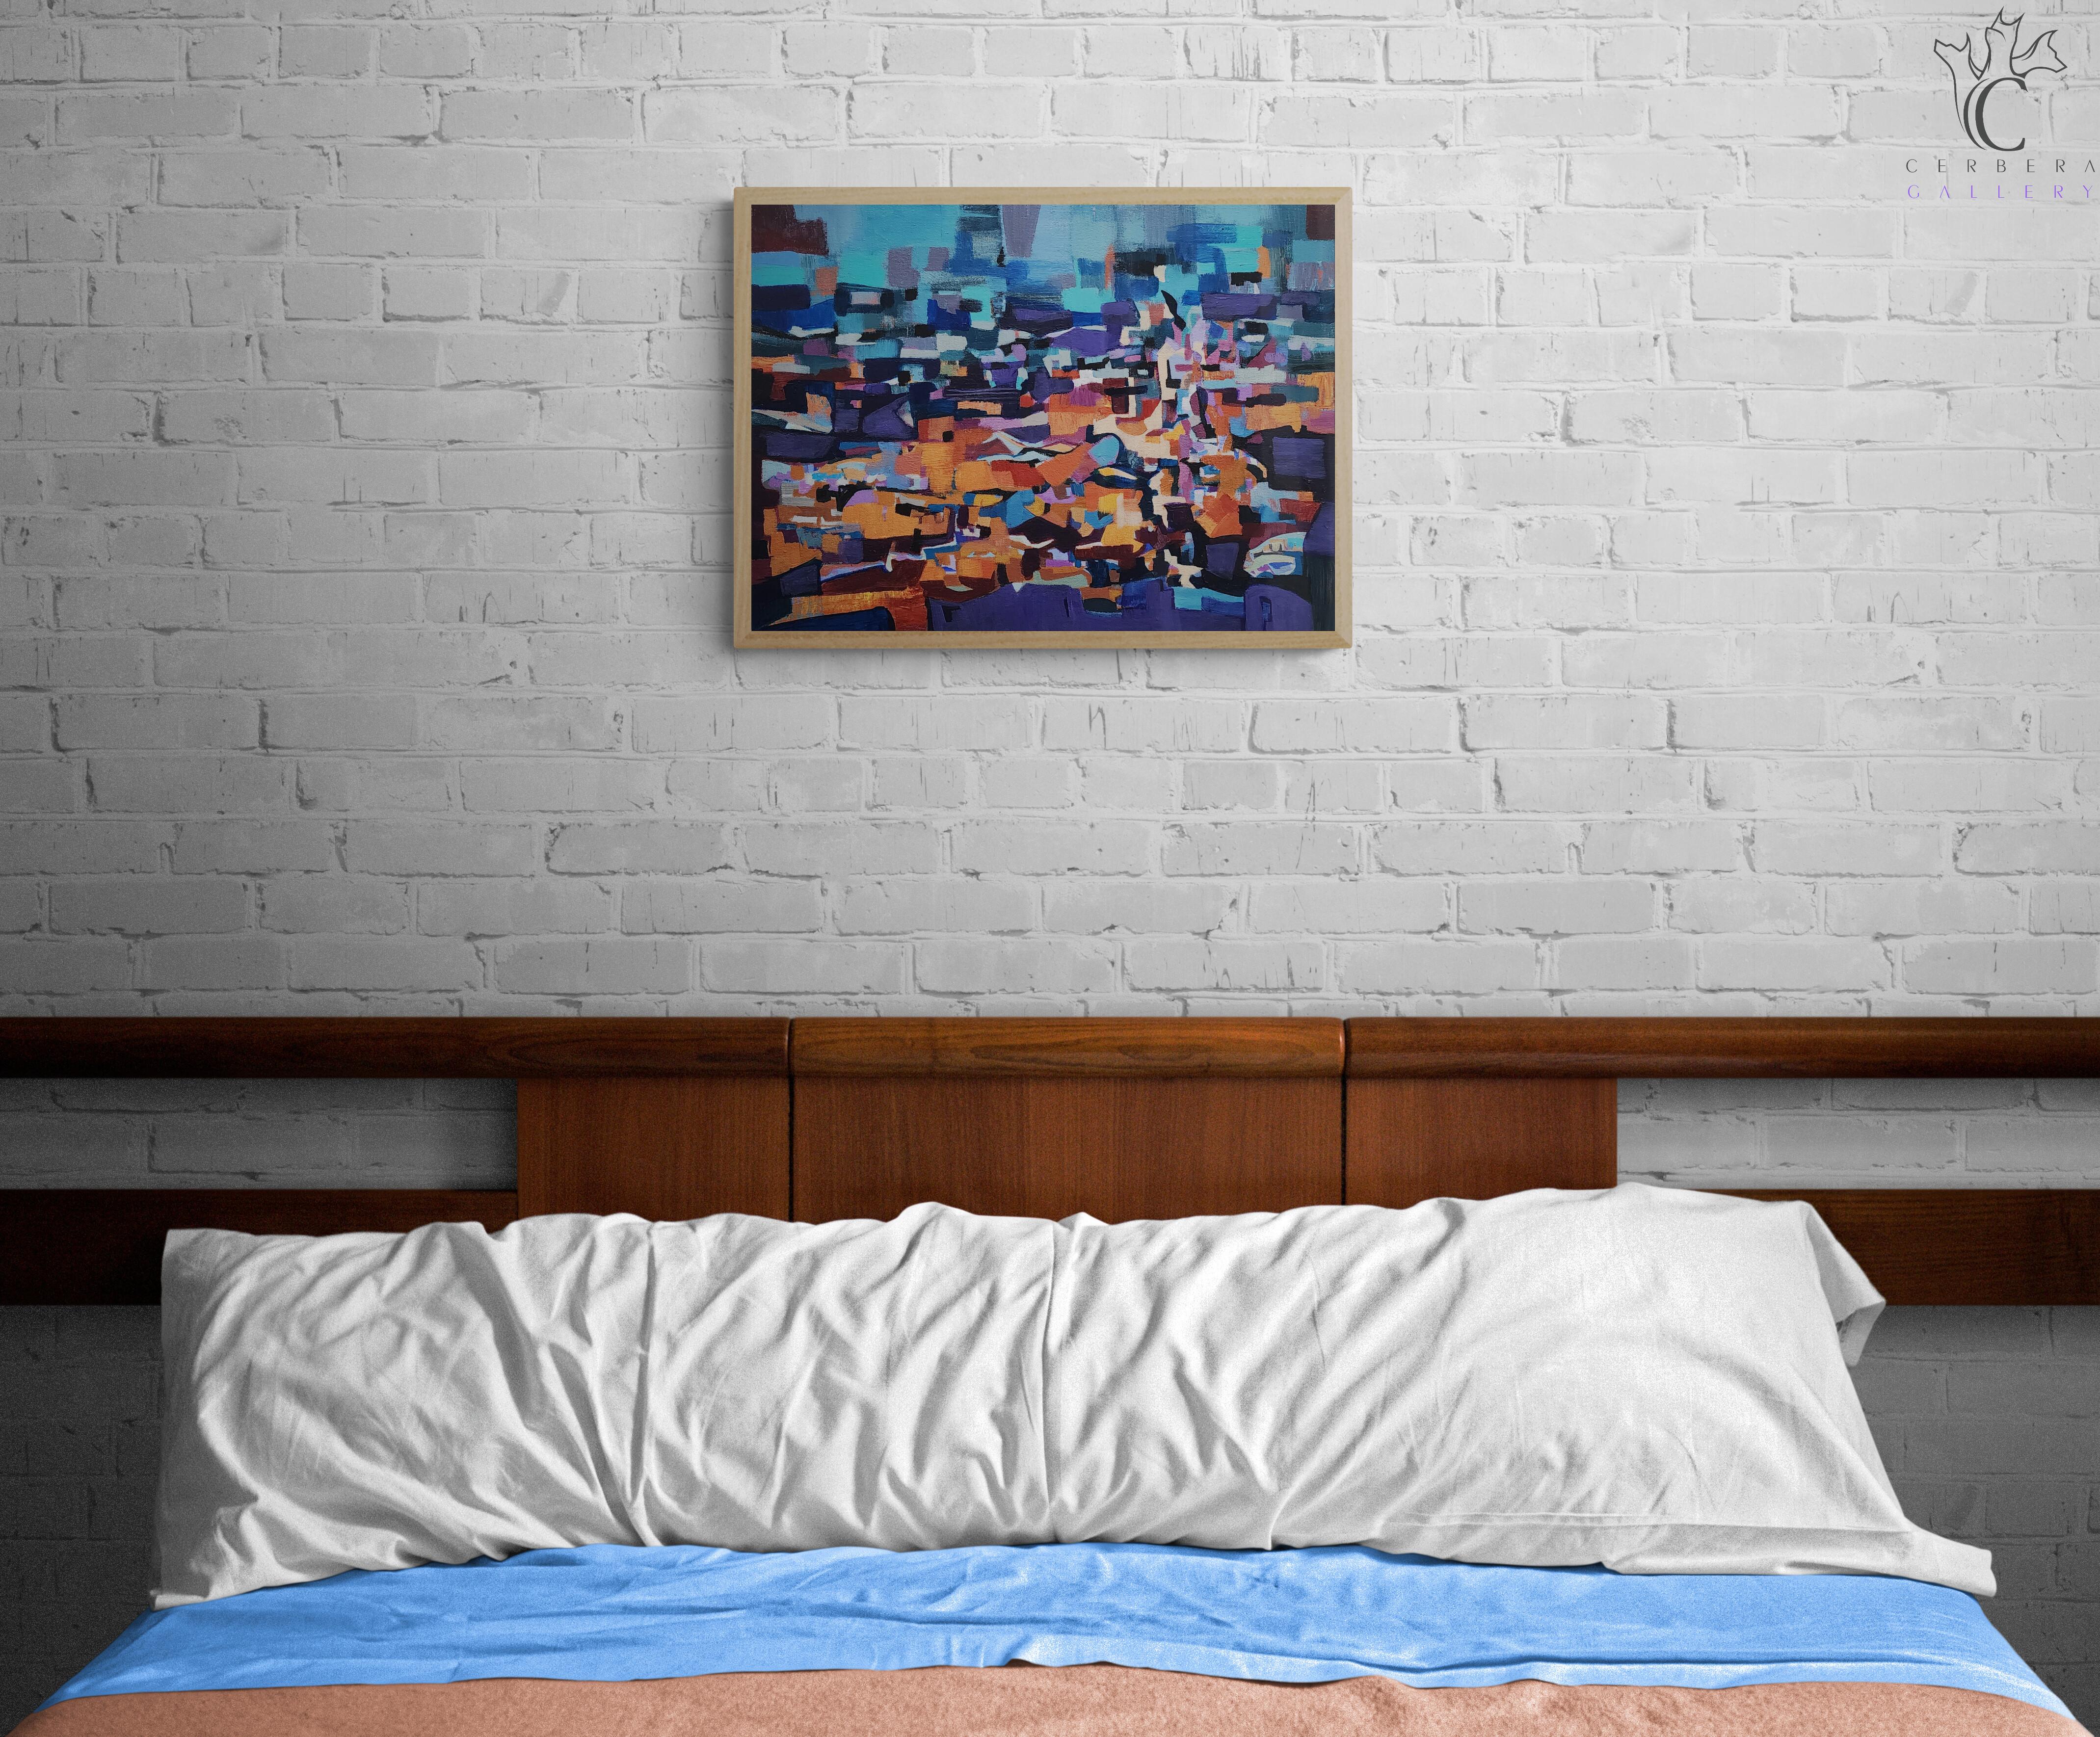 Ted Hinrichs
Village Night
Acrylic on Canvas
Year: 2020
Size: 18x24in   
Framed: 20x26x2in
Signed by hand
COA provided
Ref.: 24802-1721
*Framed in naural Wood

Tags: Abstract, Acrylic, Gestural Abstraction, Blue, Light Blue, Teal, Orange

Ted